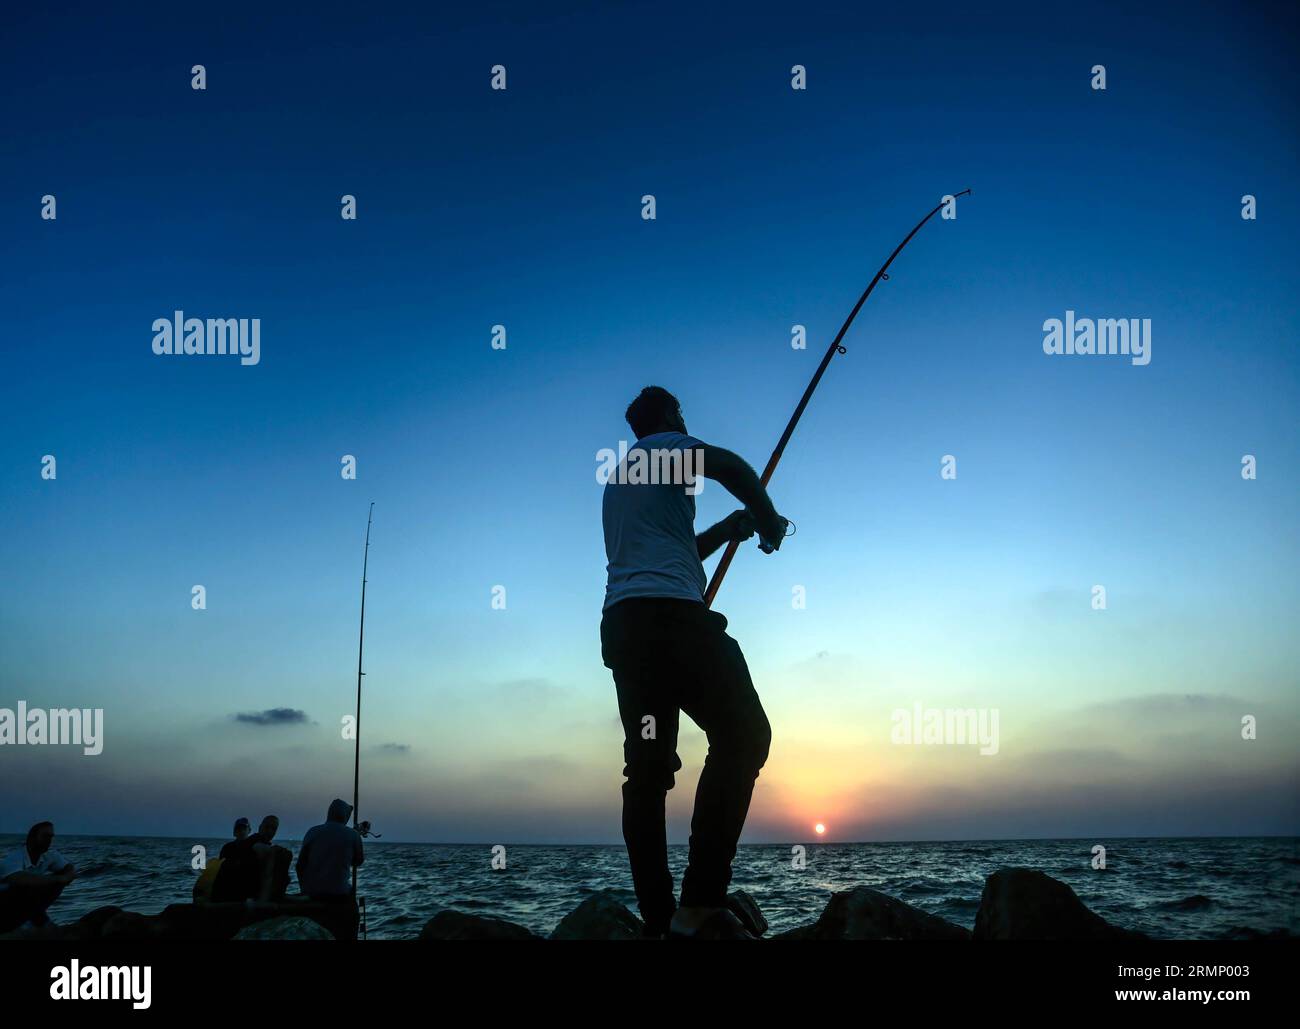 Palestinian men use fishing rods to catch fish during sunset on